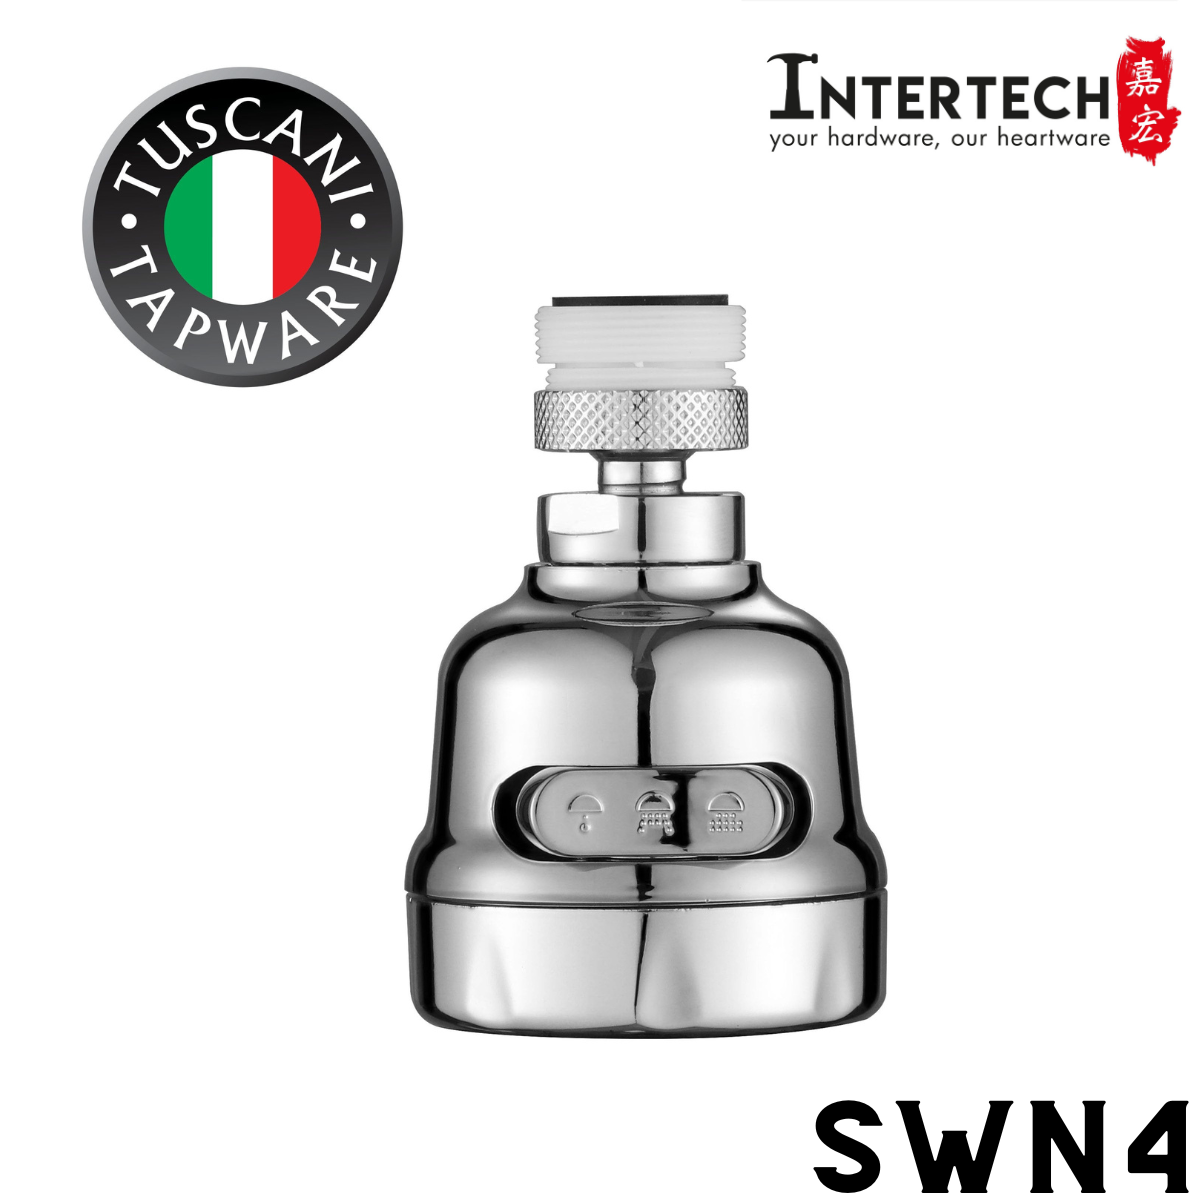 Tuscani Double Flow Water Tap Filter SWN4